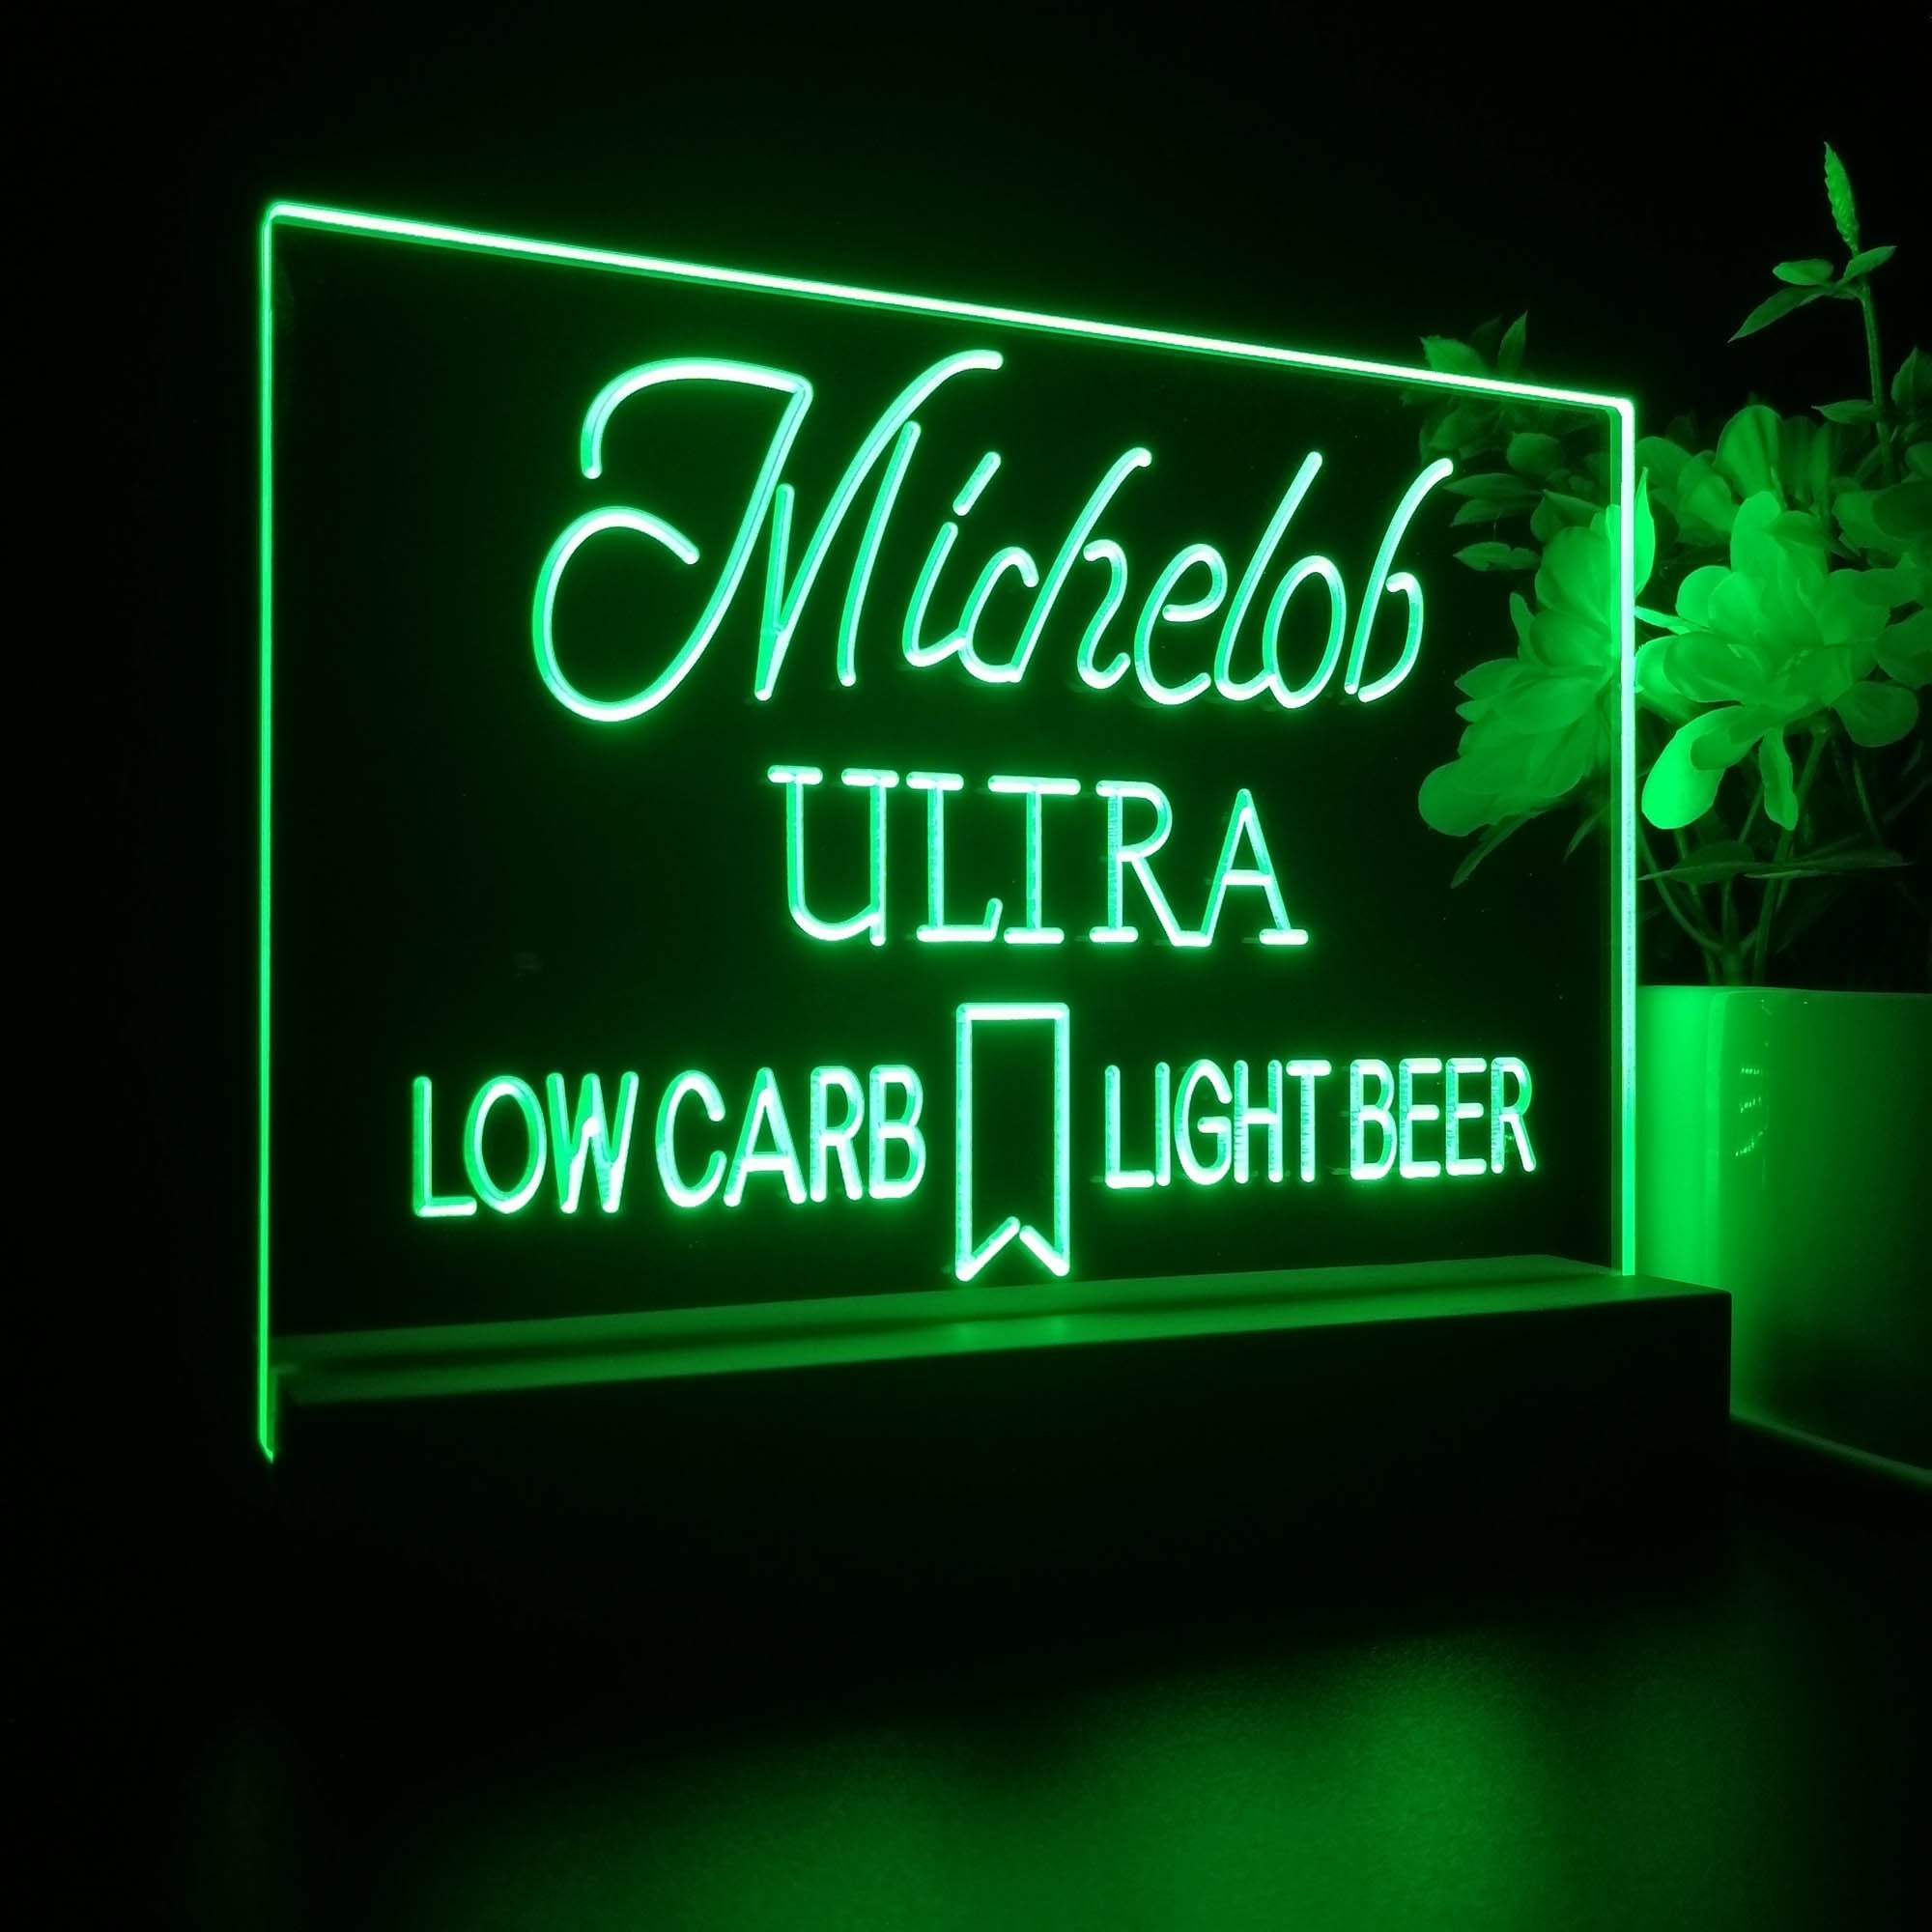 Michelob Ultra Low Carb Light Beer Neon Sign Pub Bar Lamp